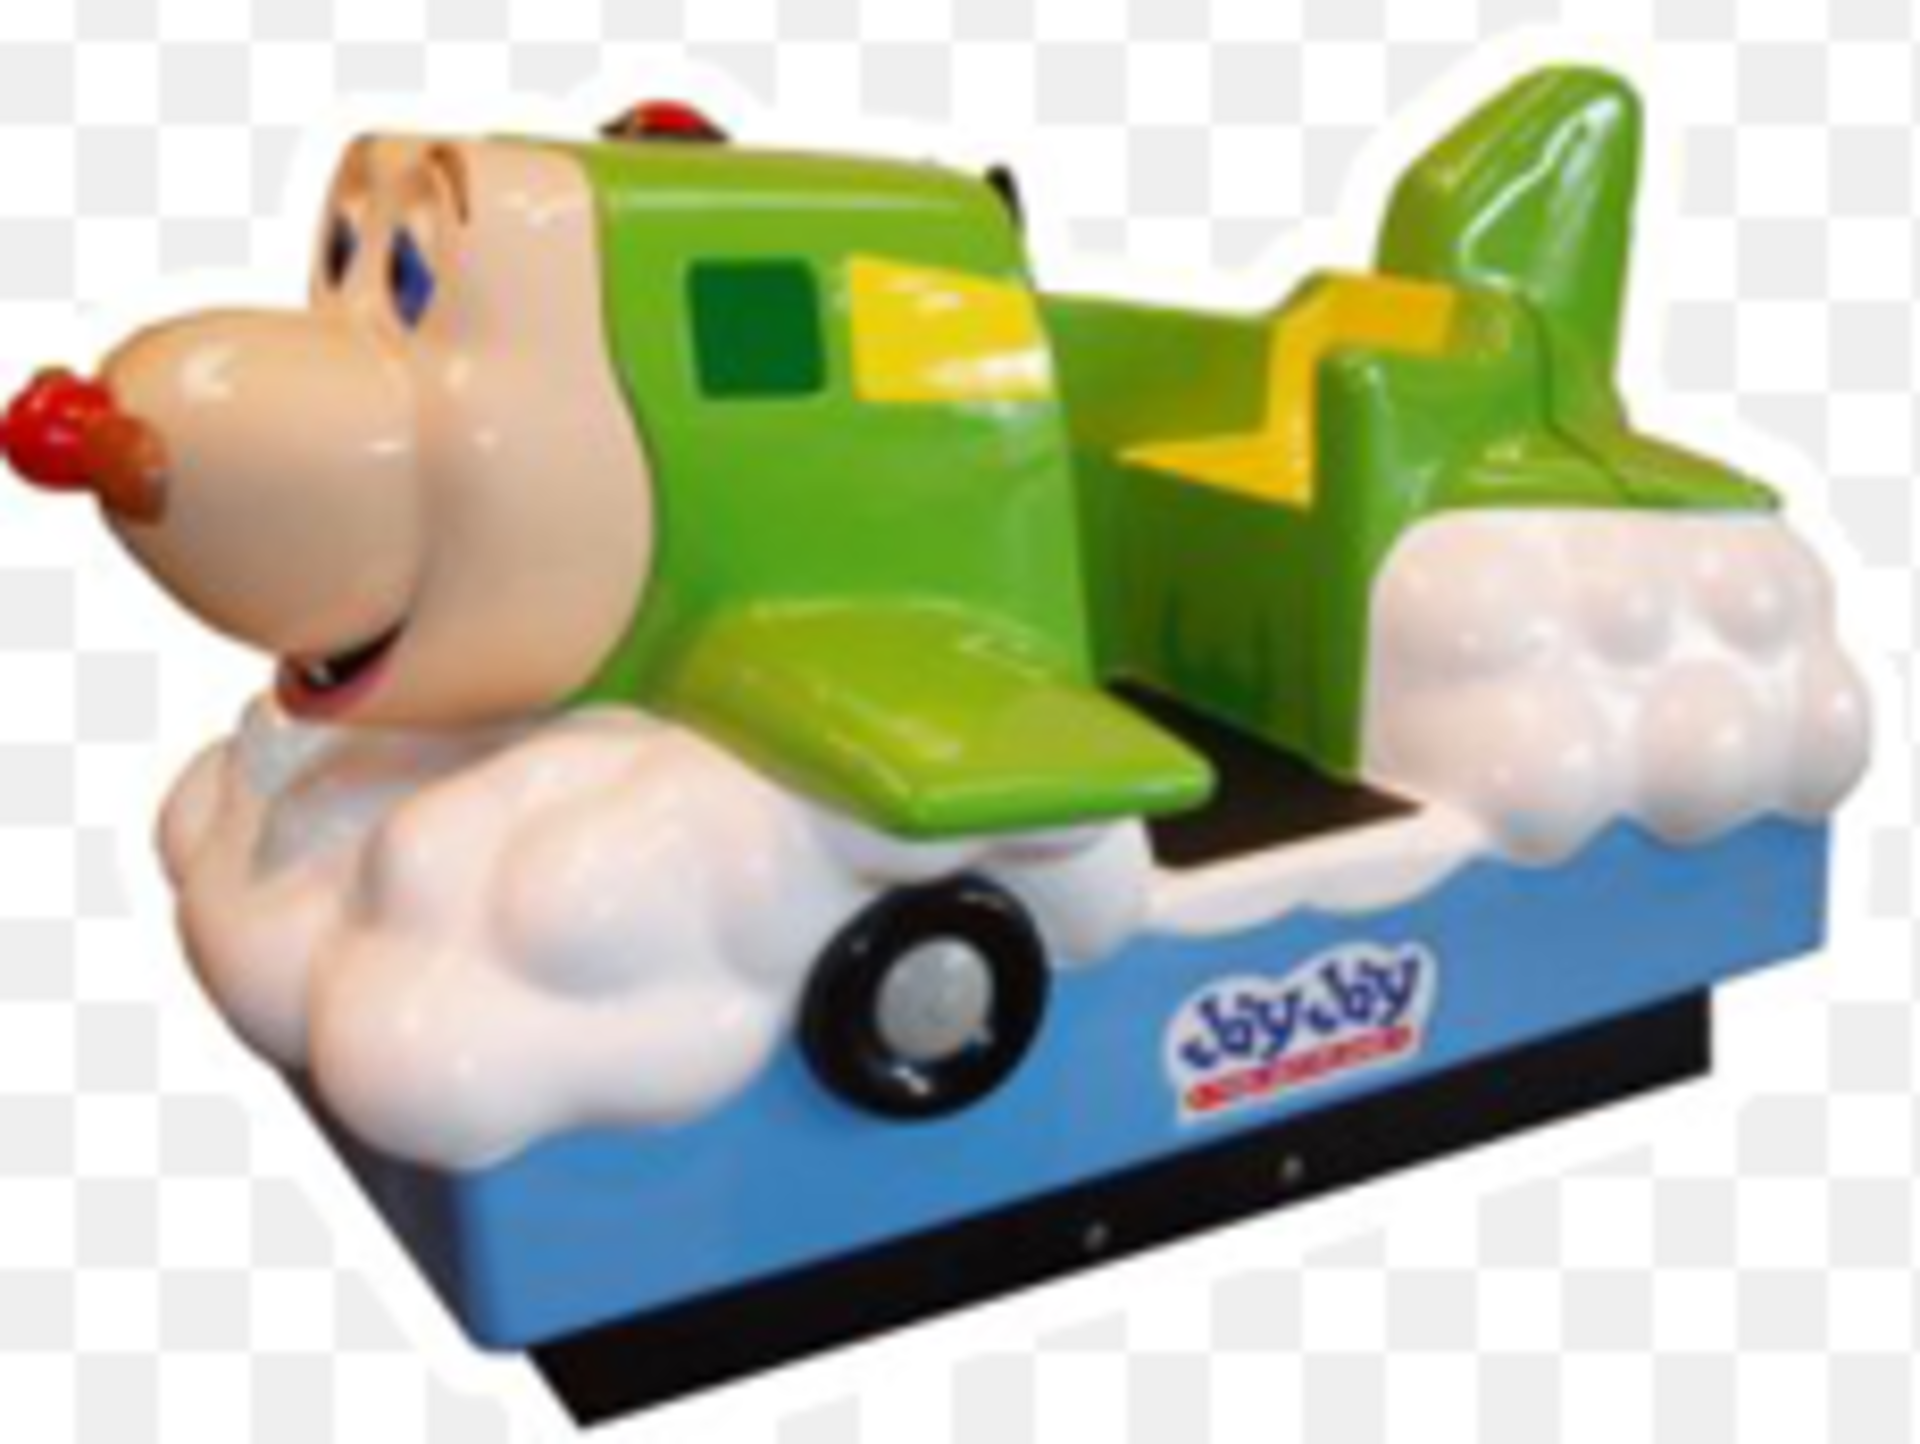 Snuffy Child Ride -sold as seen – Not Tested